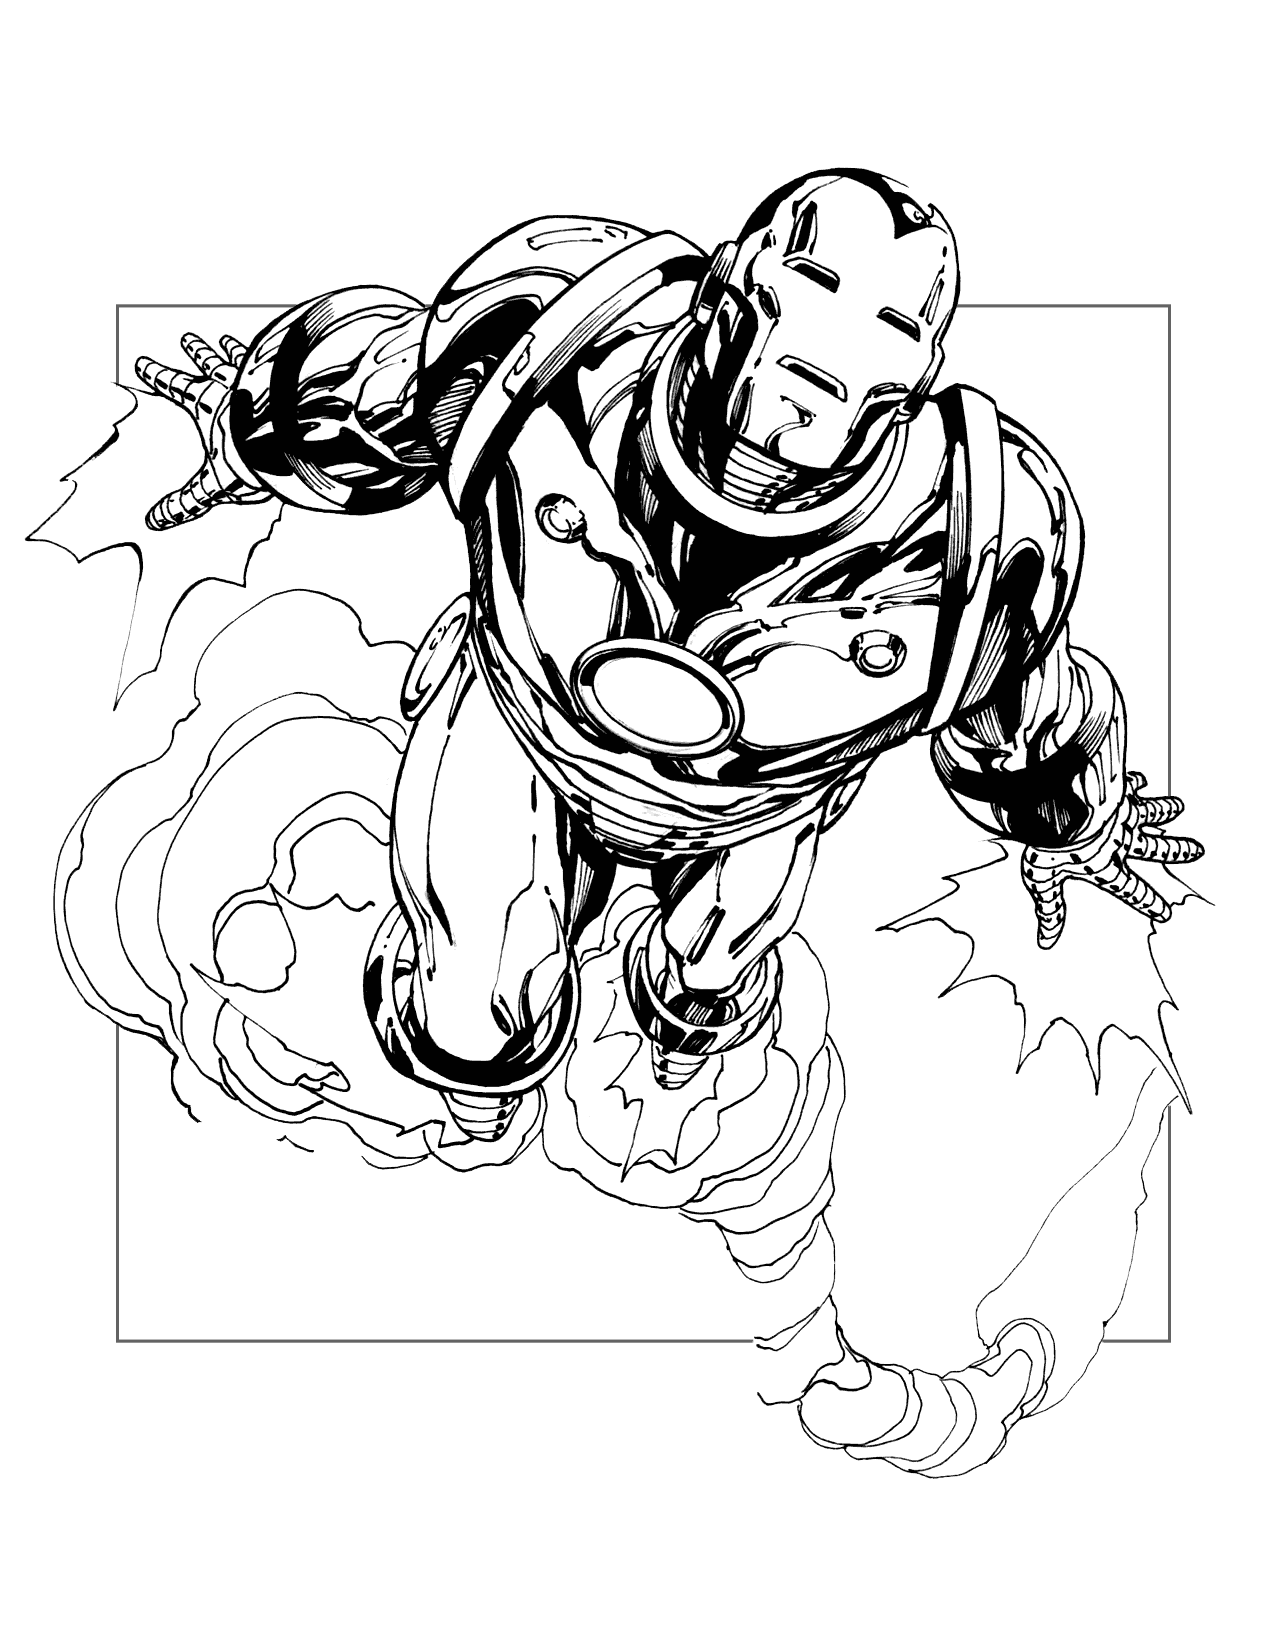 Iron Man Flying Coloring Page